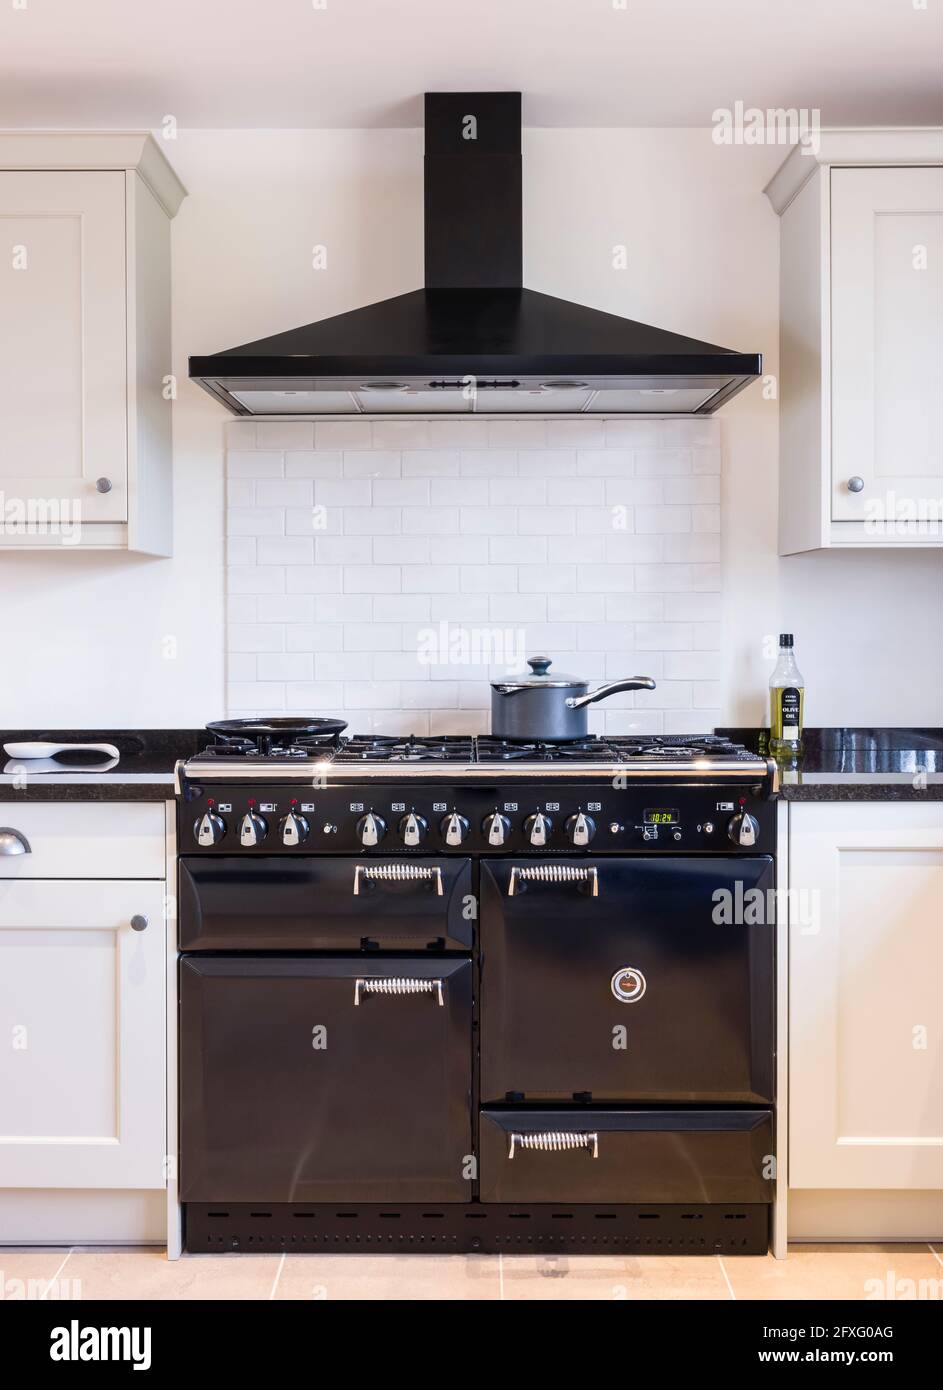 Black enamel oven range cooker with chimney hood in a modern kitchen with shaker style painted wood units in neutral off white. UK farmhouse kitchens Stock Photo